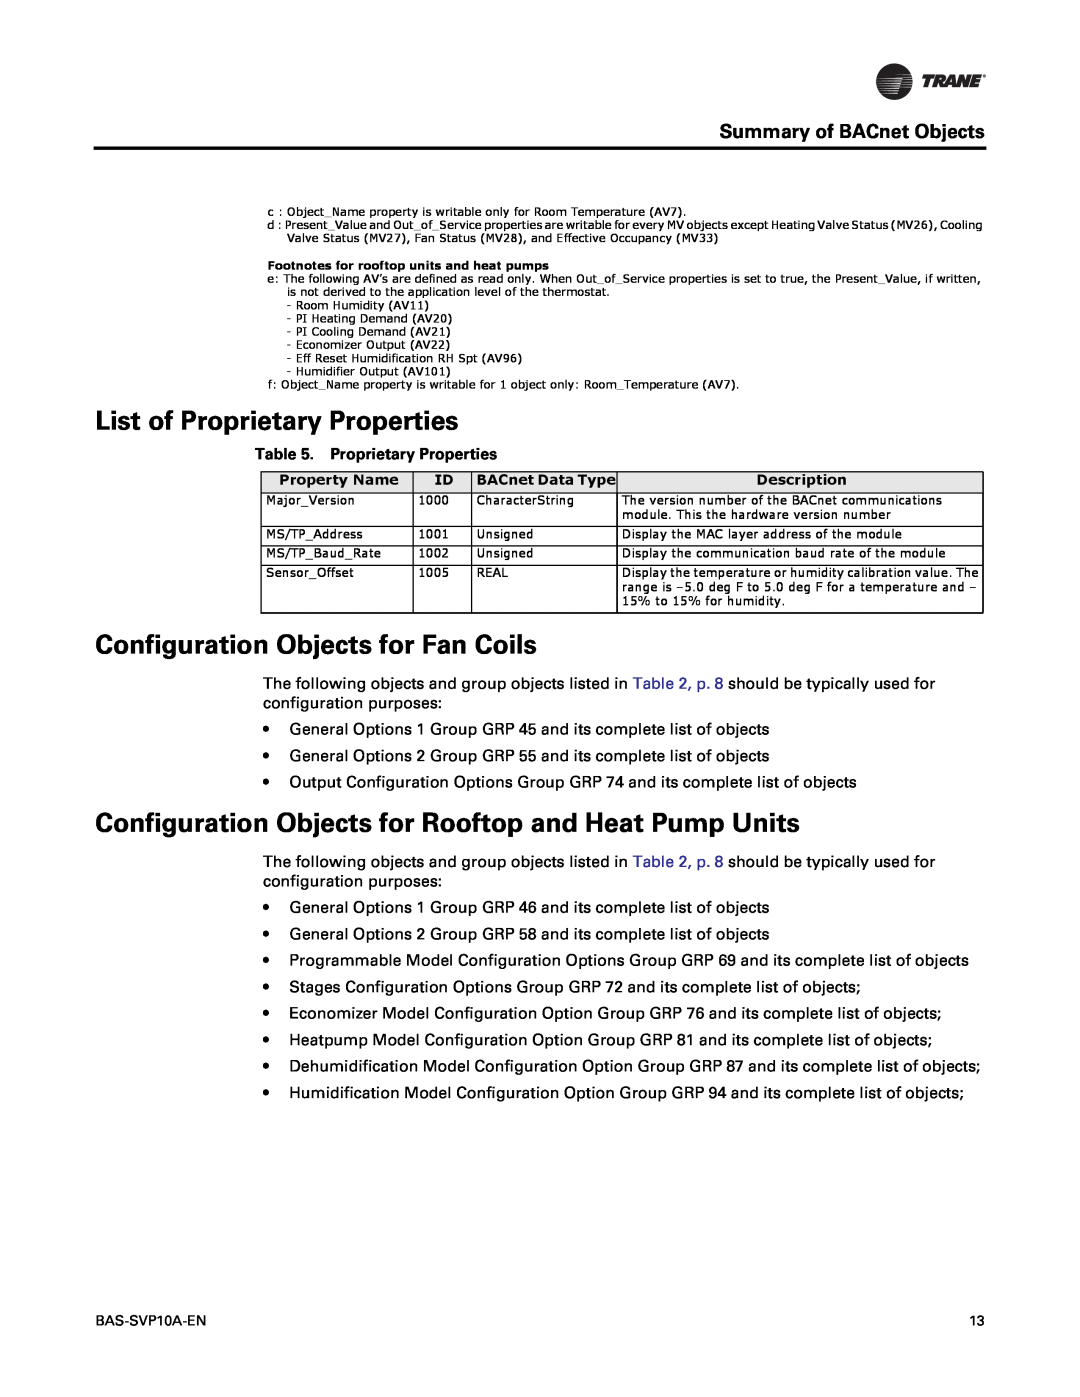 Trane Trane Communicating Thermostats (BACnet) manual List of Proprietary Properties, Configuration Objects for Fan Coils 